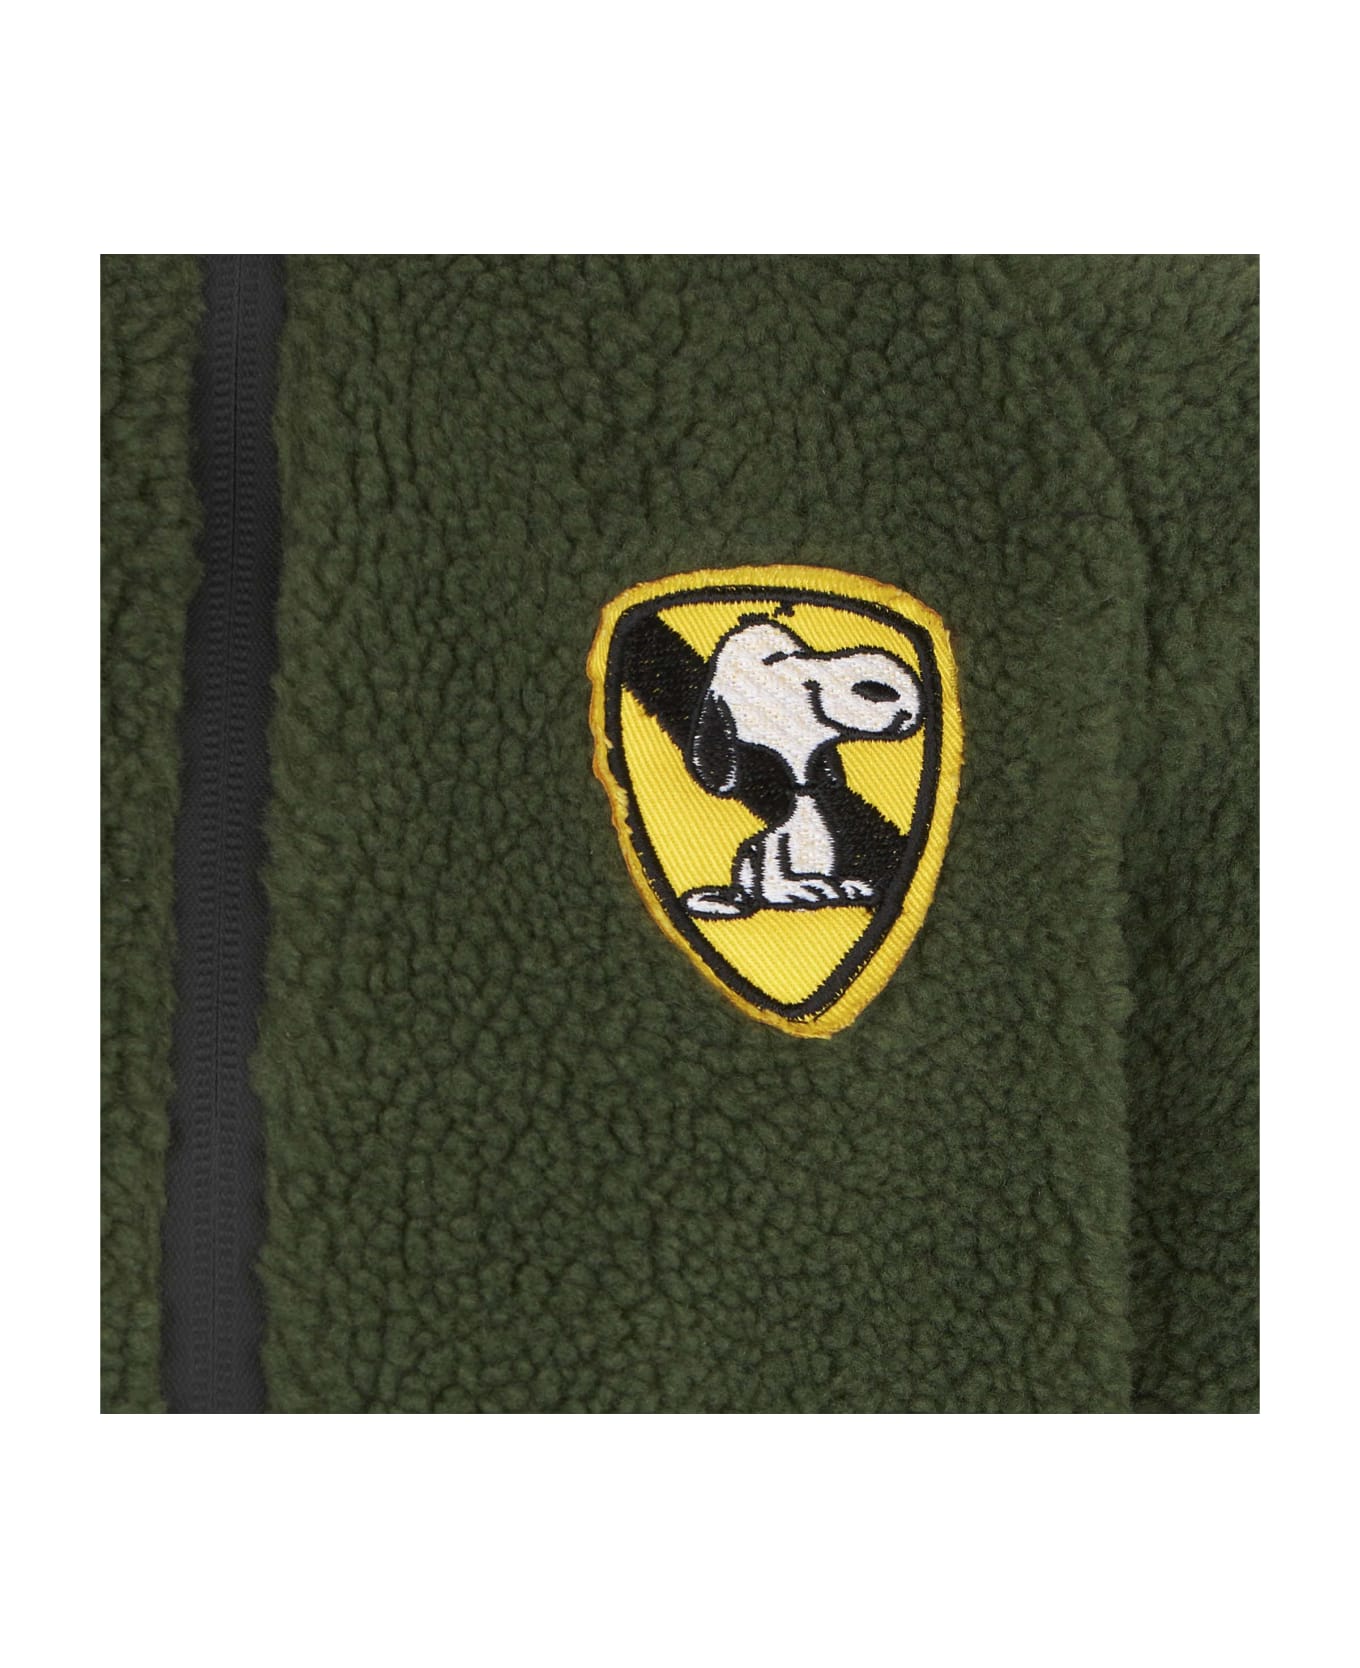 MC2 Saint Barth Kid Sherpa Jacket With Snoopy Patch | Peanuts® Special Edition - GREEN コート＆ジャケット